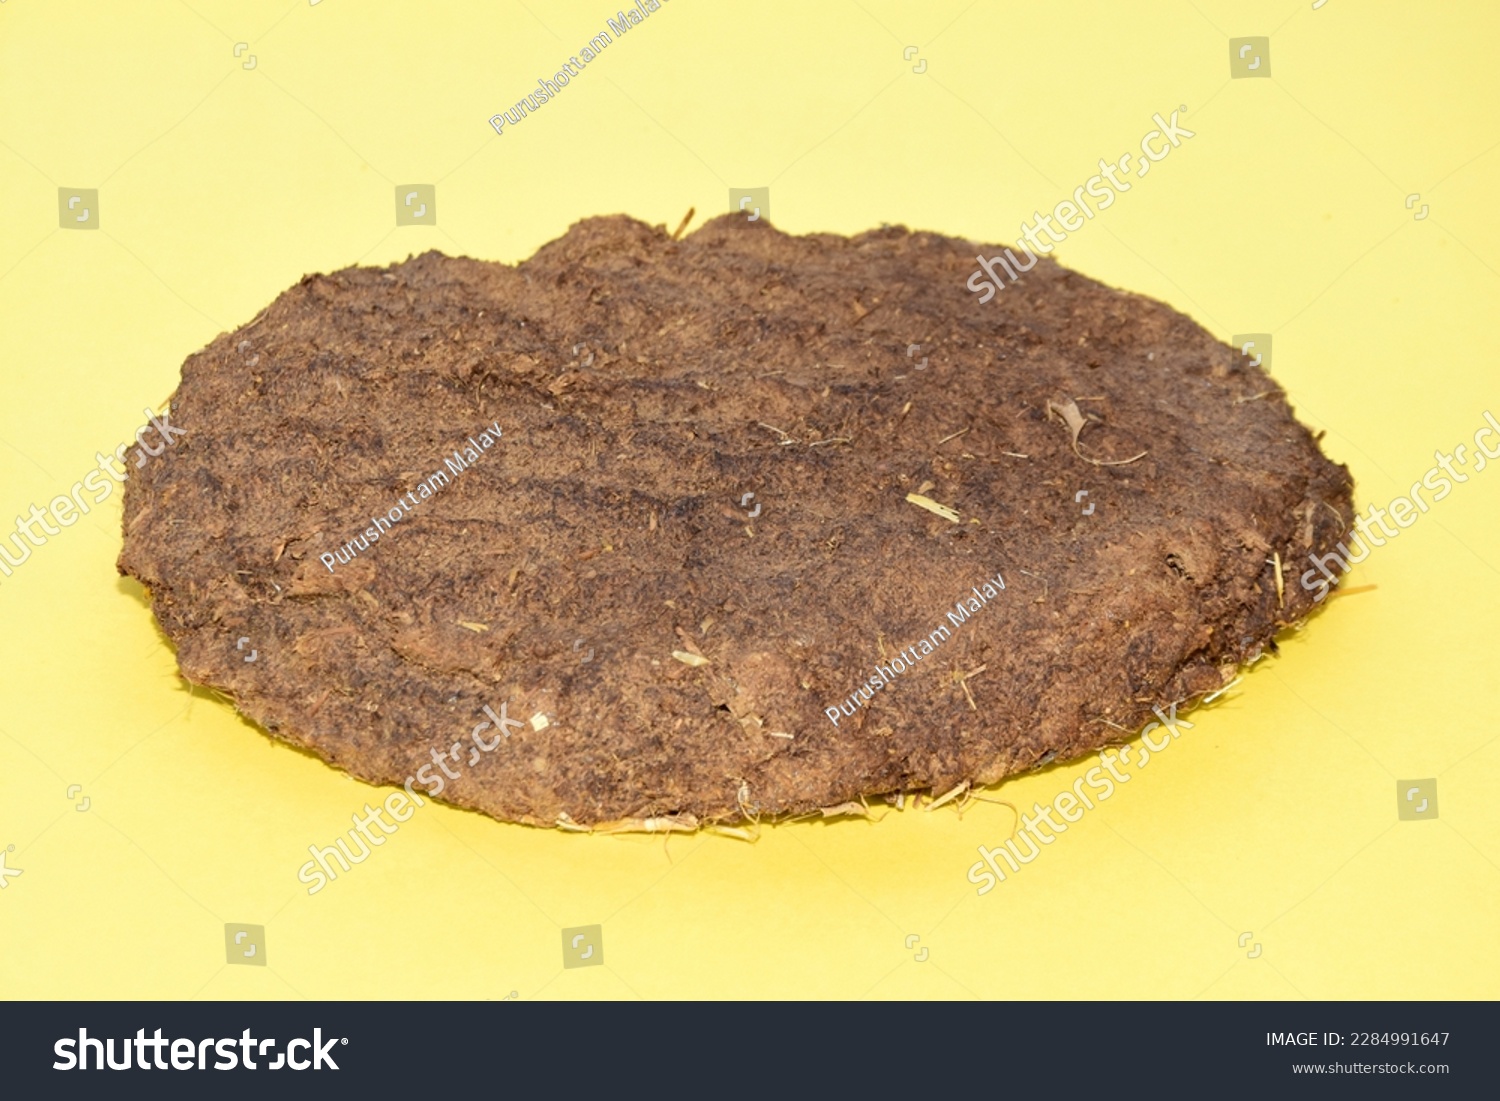 Dry Cow Dung Cakes for Hawan Kund. Cow dung used made incense sticks in India. dung cake for dhup #2284991647